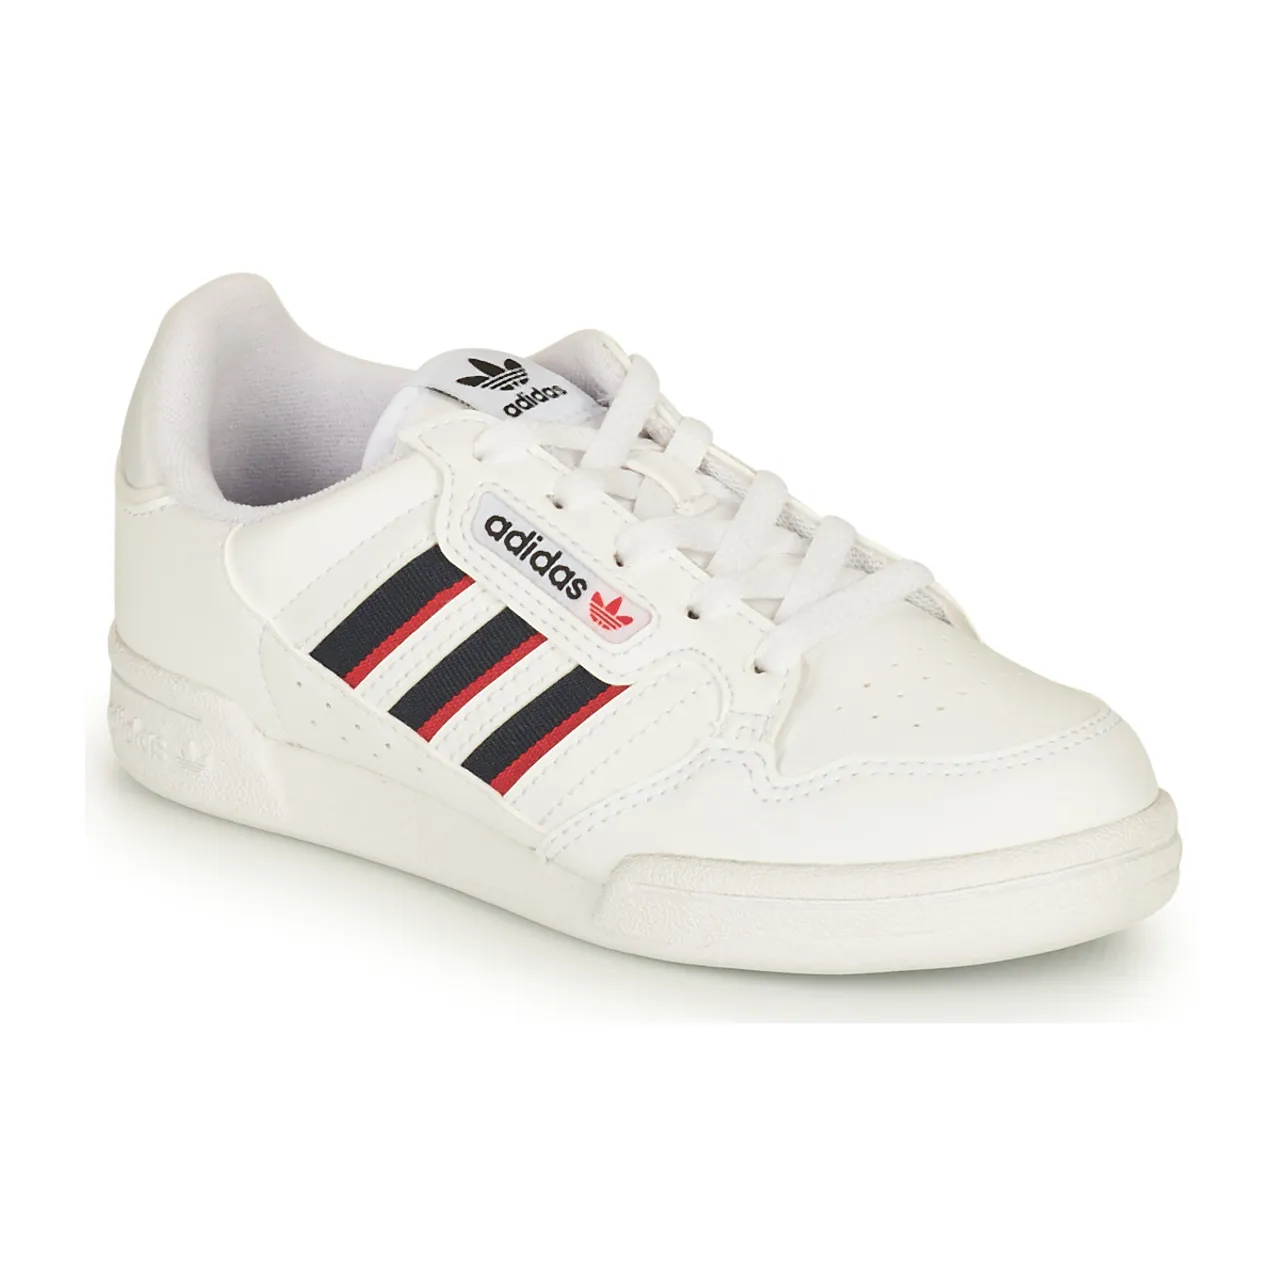 adidas  CONTINENTAL 80 STRI C  boys's Children's Shoes (Trainers) in White